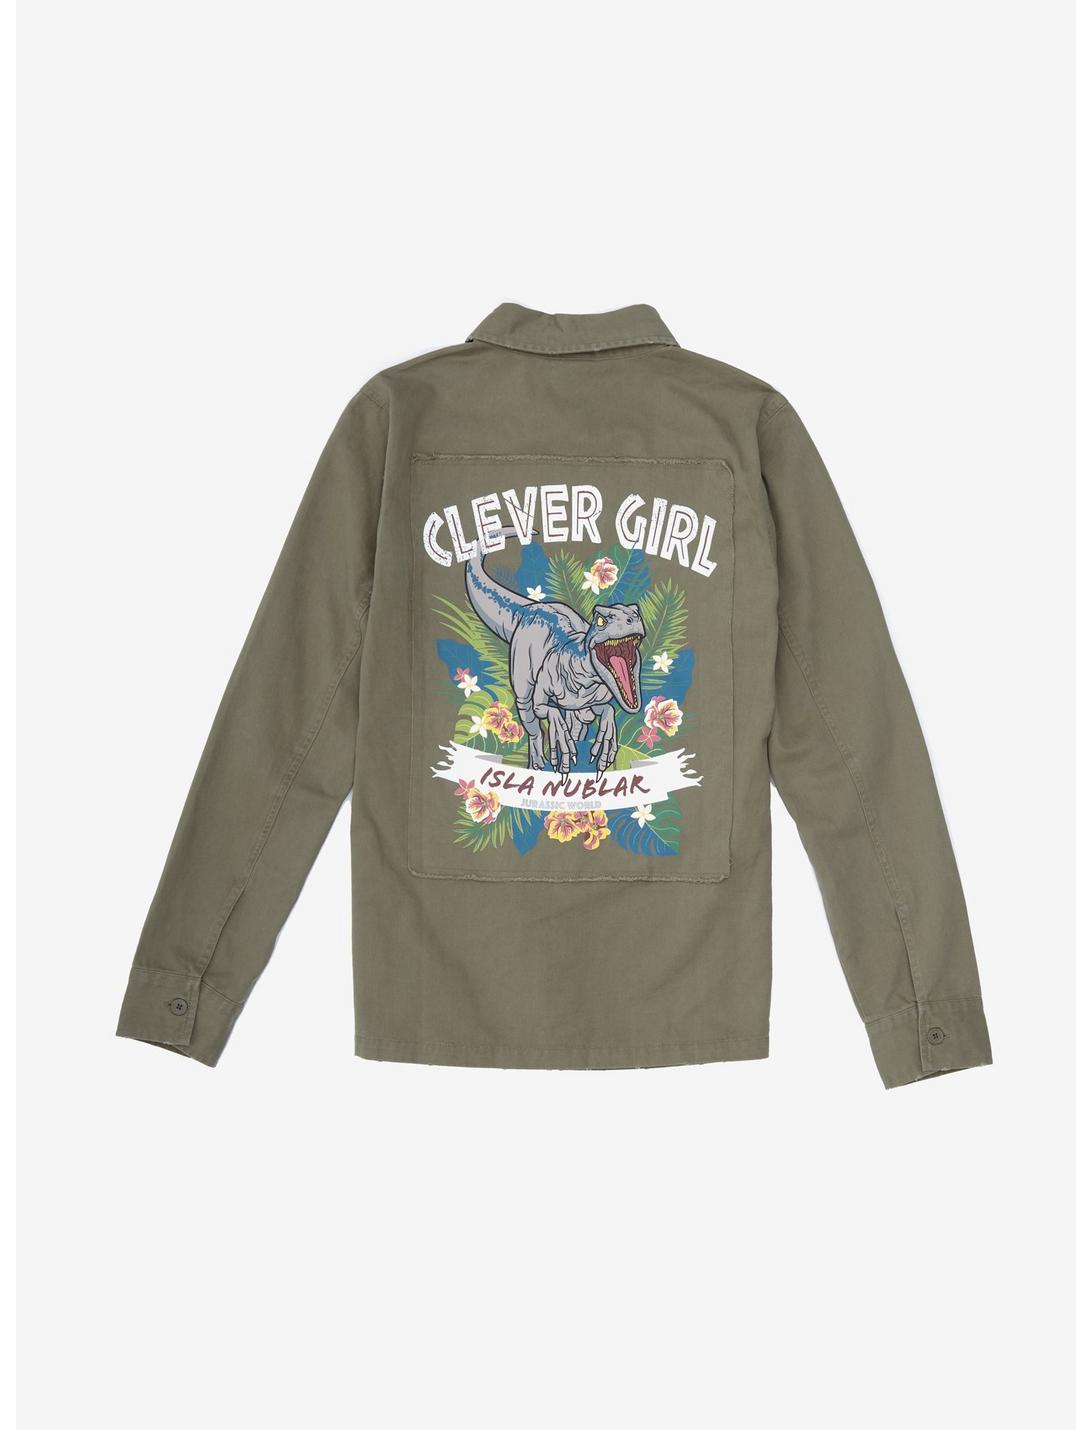 Her Universe Fashion Show Winner Jurassic World Clever Girl Jacket Plus Size, MULTI, hi-res